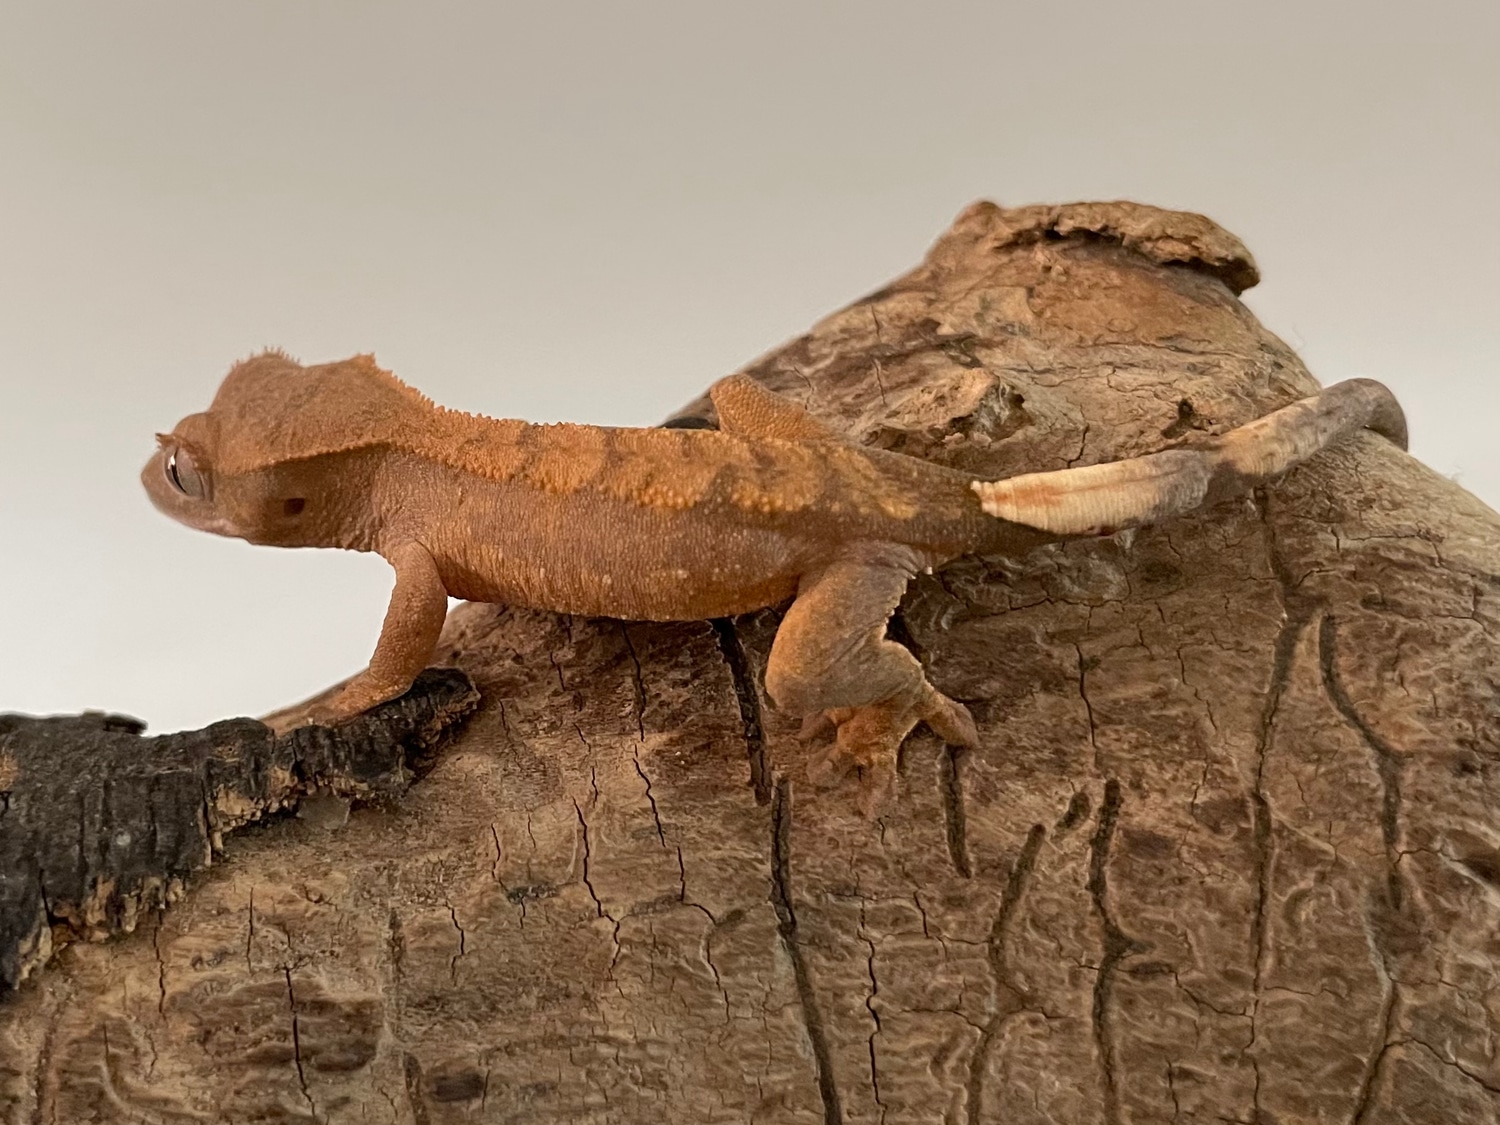 Harlequin Crested Gecko by Green Stuff Exotics